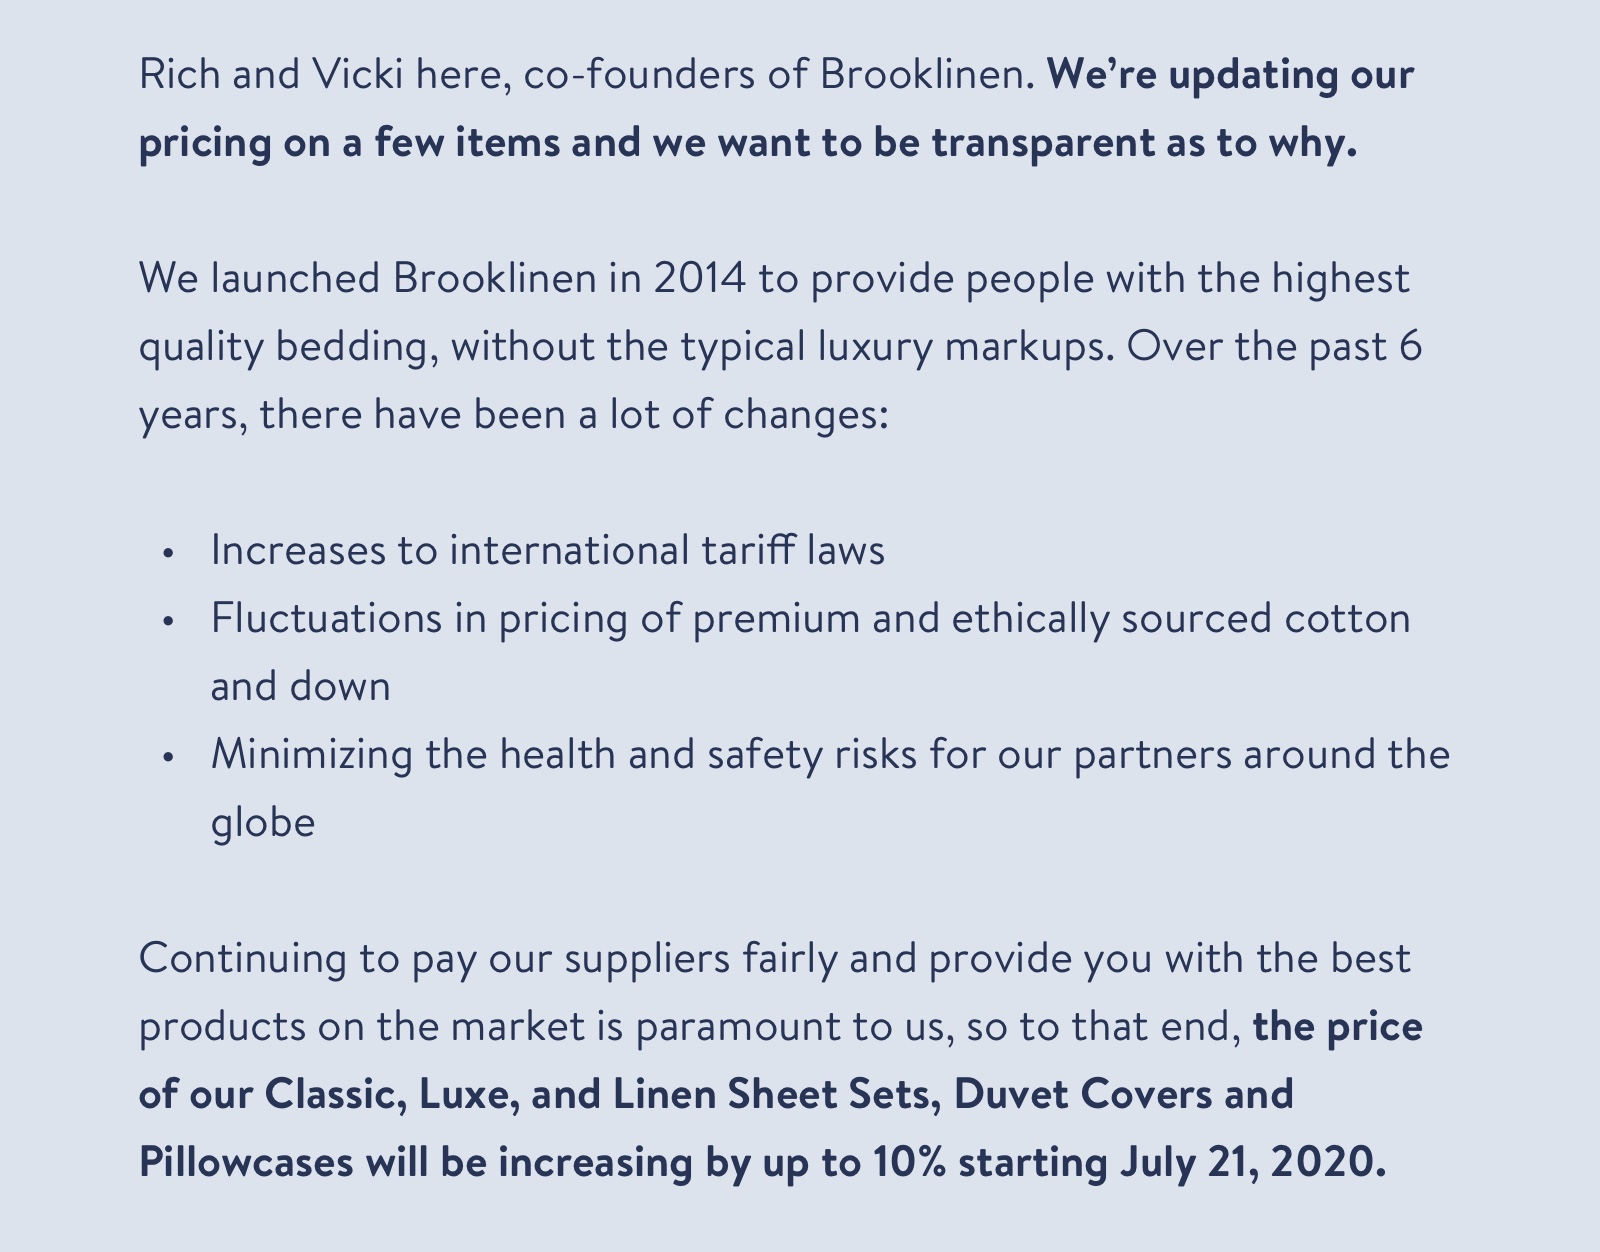 Rich and Vicki here, co-founders of Brooklinen. We're updating our pricing on a few items and we want to be transparent as to why. We launched Brooklinen in 2014 to provide people with the highest quality bedding, without the typical luxury markups. Over the past 6 years, there have been a lot of changes. Continuing to pay our suppliers fairly and to provide you with the best products on the market is paramount to us, so to that end, the price of our Classic, Luxe, and Linen Sheet Sets, Duvet Covers and Pillowcases will be raising by up to 10% starting July 21, 2020. 